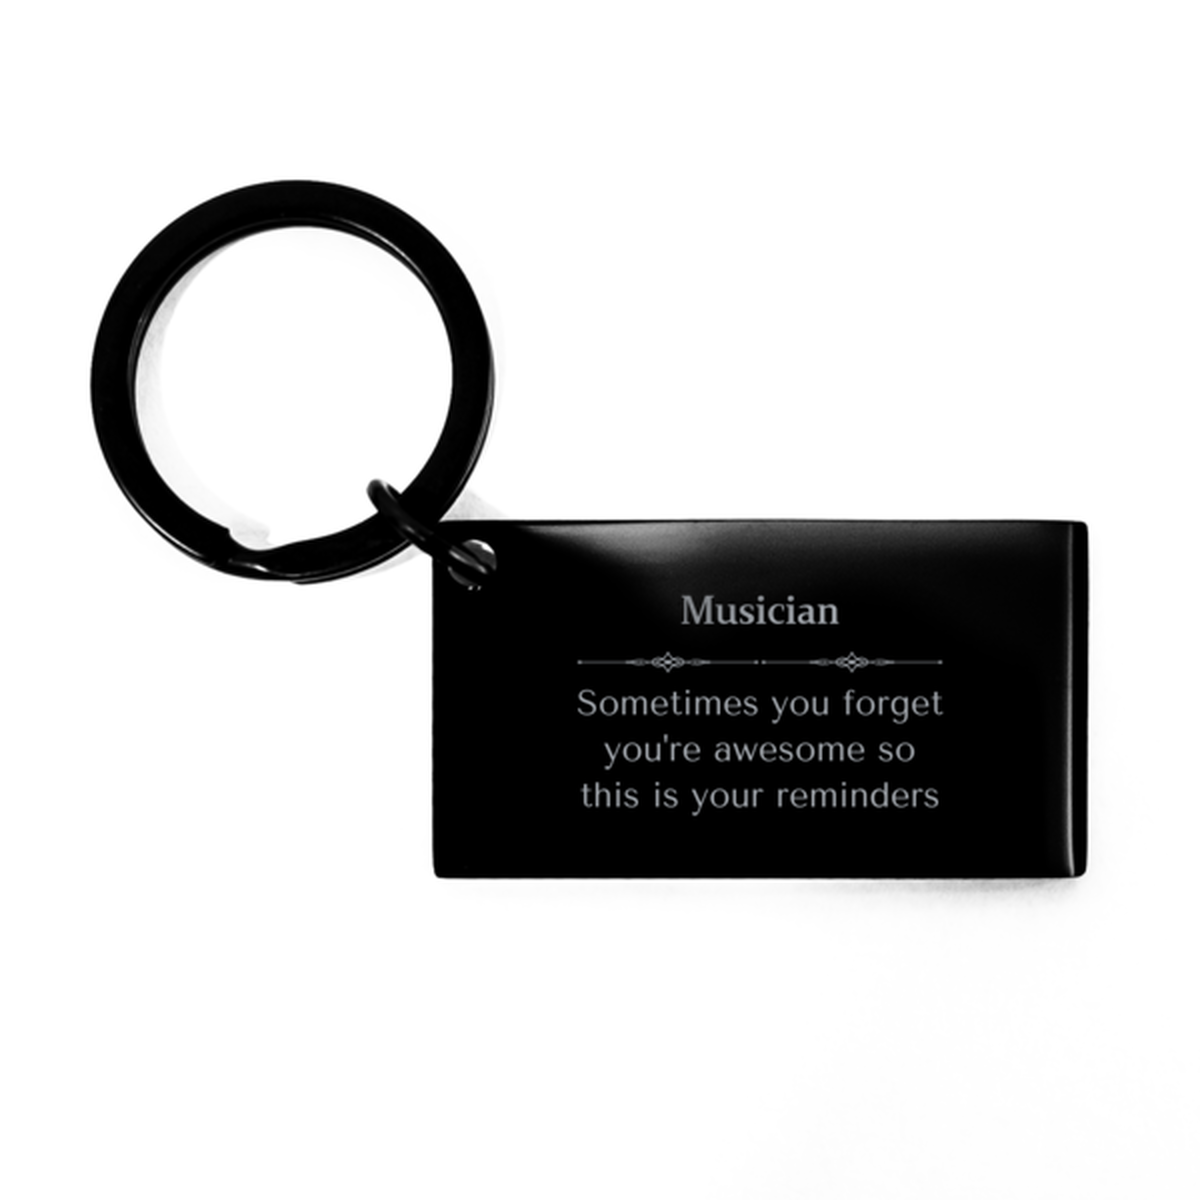 Sentimental Musician Keychain, Parking Lot Attendant Sometimes you forget you're awesome so this is your reminders, Graduation Christmas Birthday Gifts for Musician, Men, Women, Coworkers